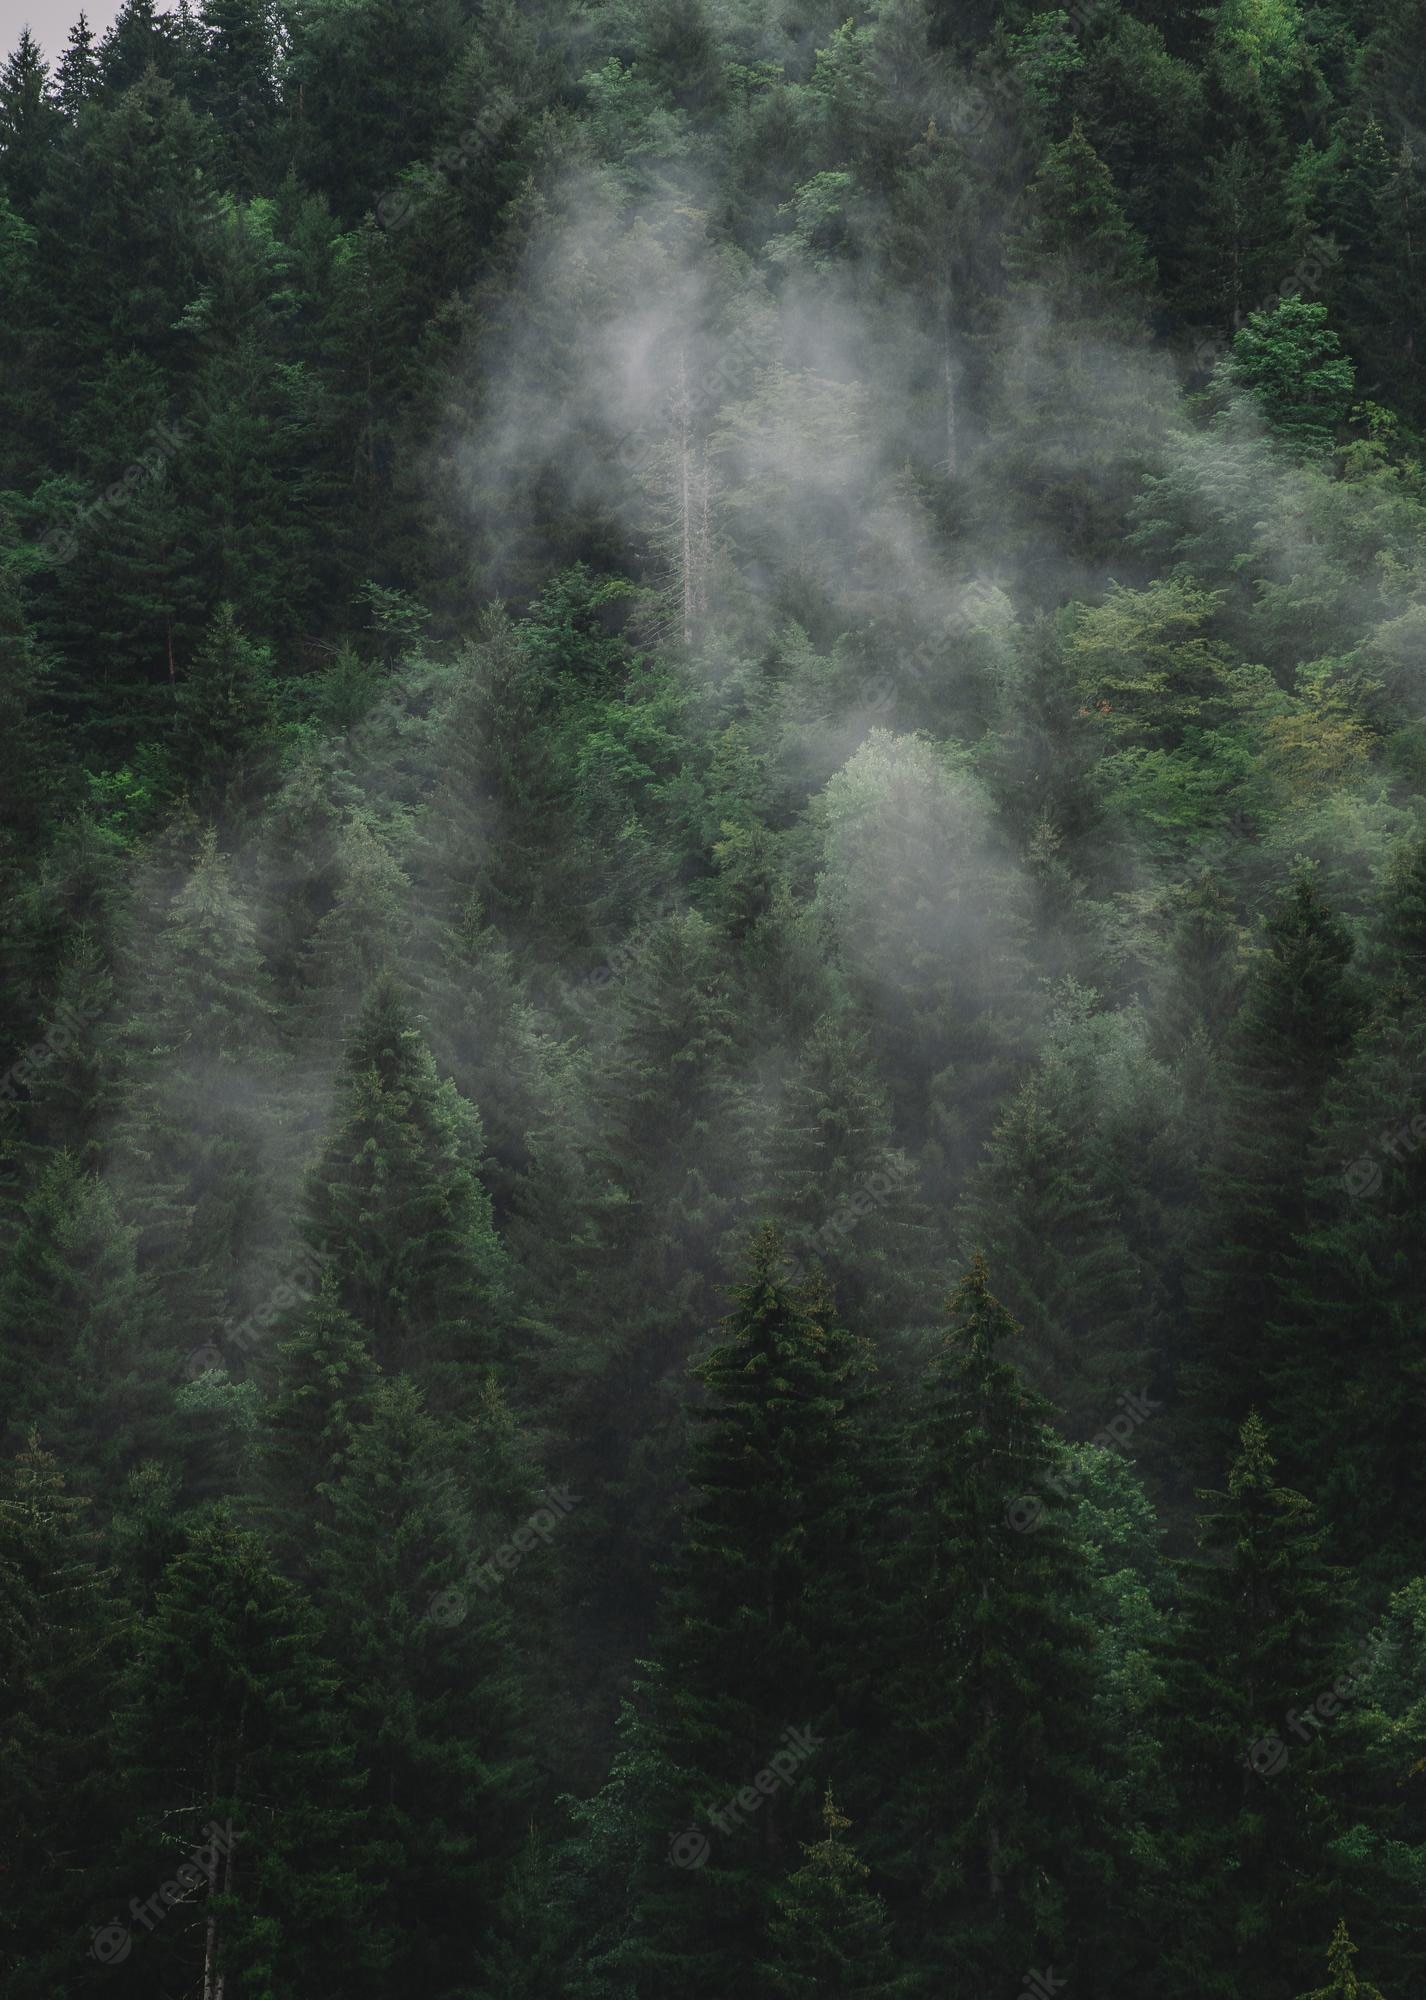 Fog rising from a dense forest of pine trees - Fog